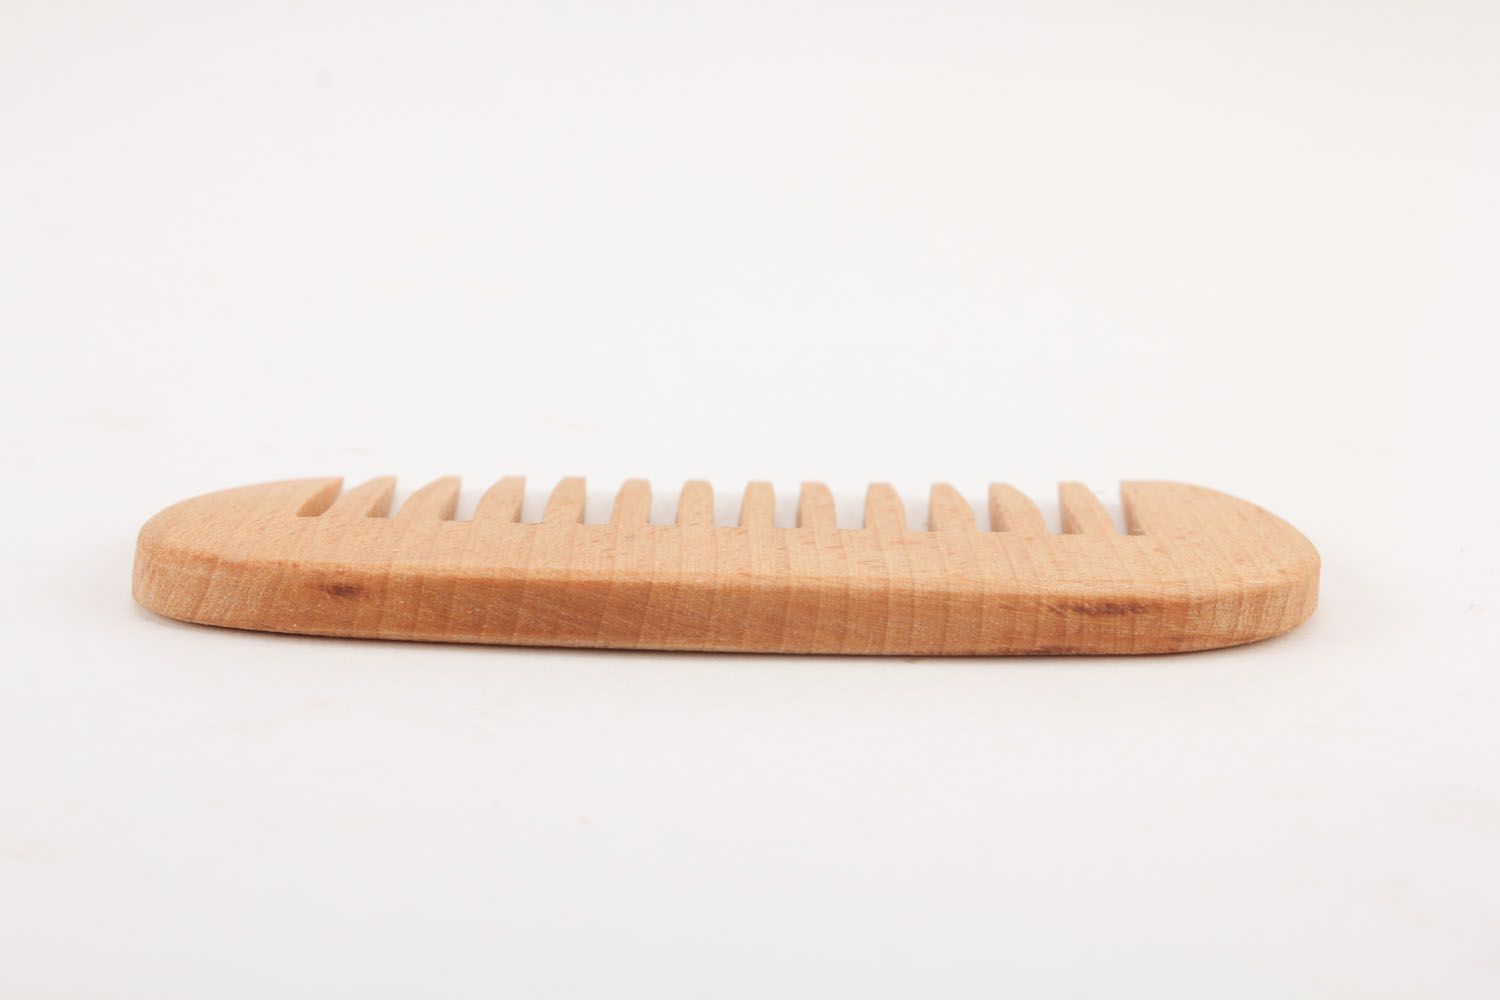 Homemade wooden comb photo 1